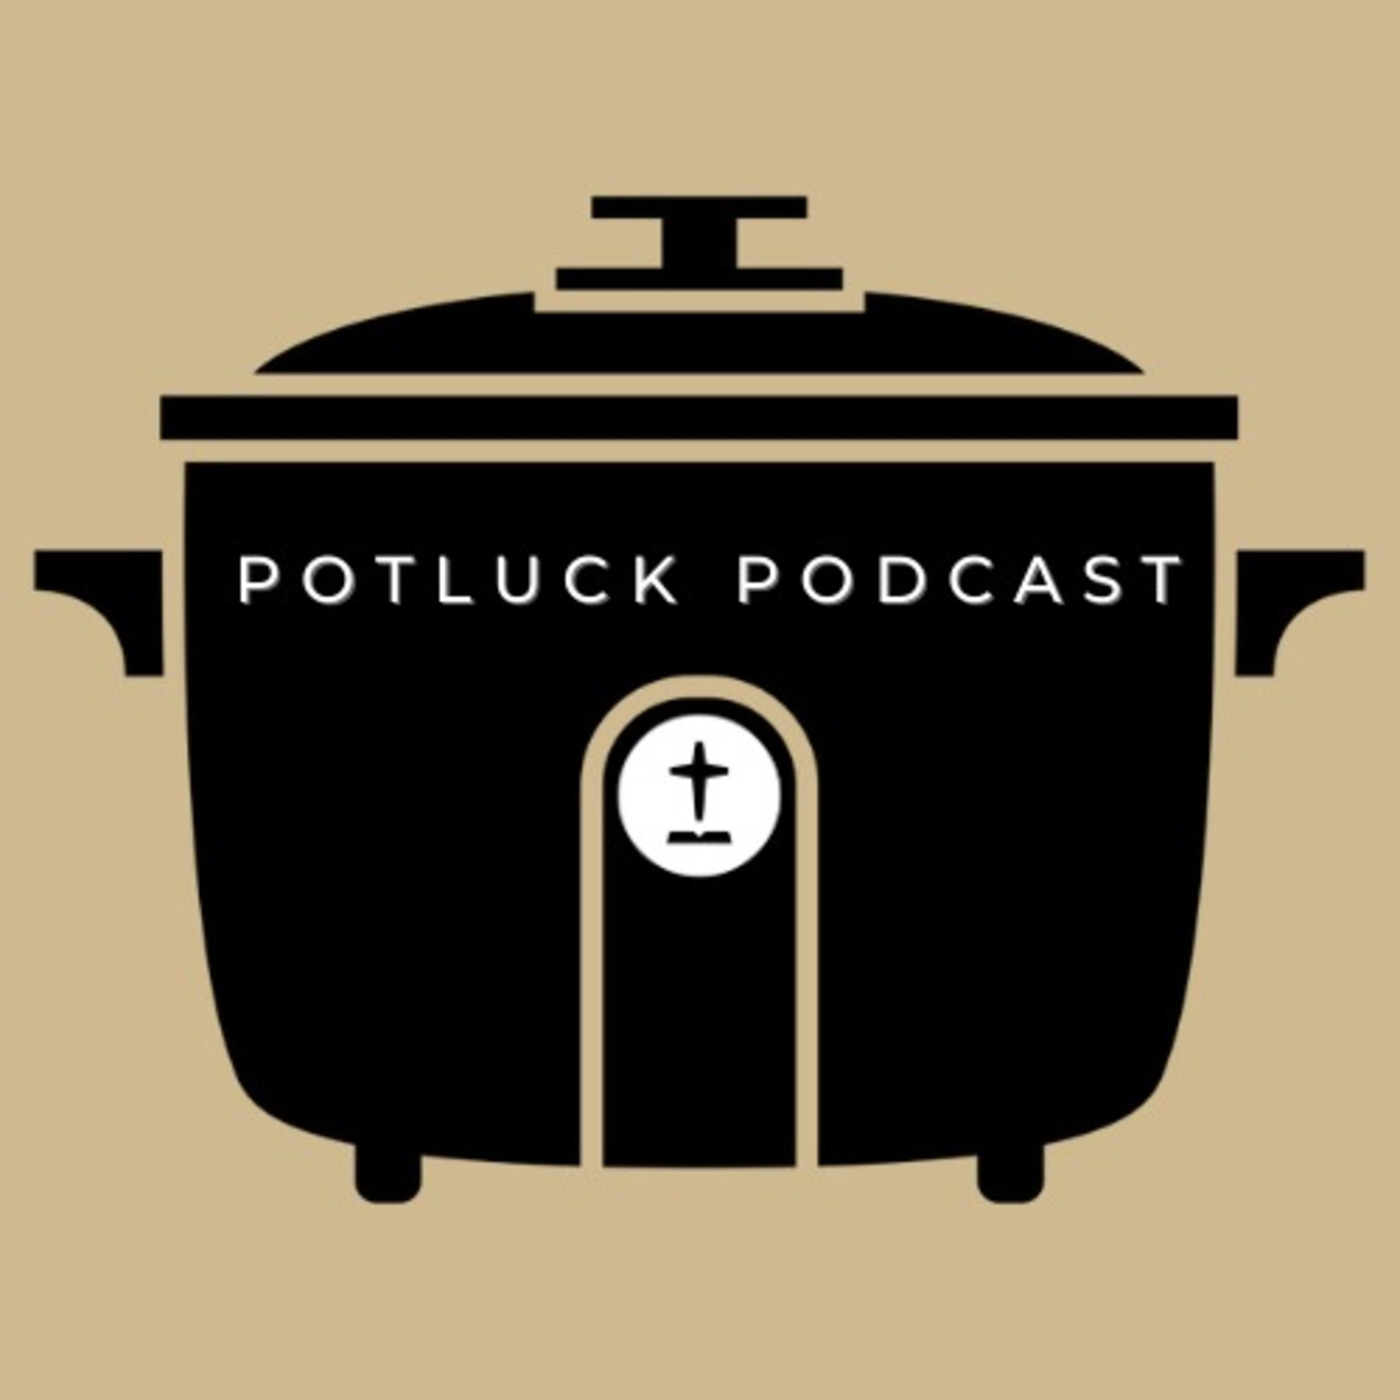 Episode 262: POTLUCK PODCAST 189: A Pulpit, A Baptism, and An Ice Issue